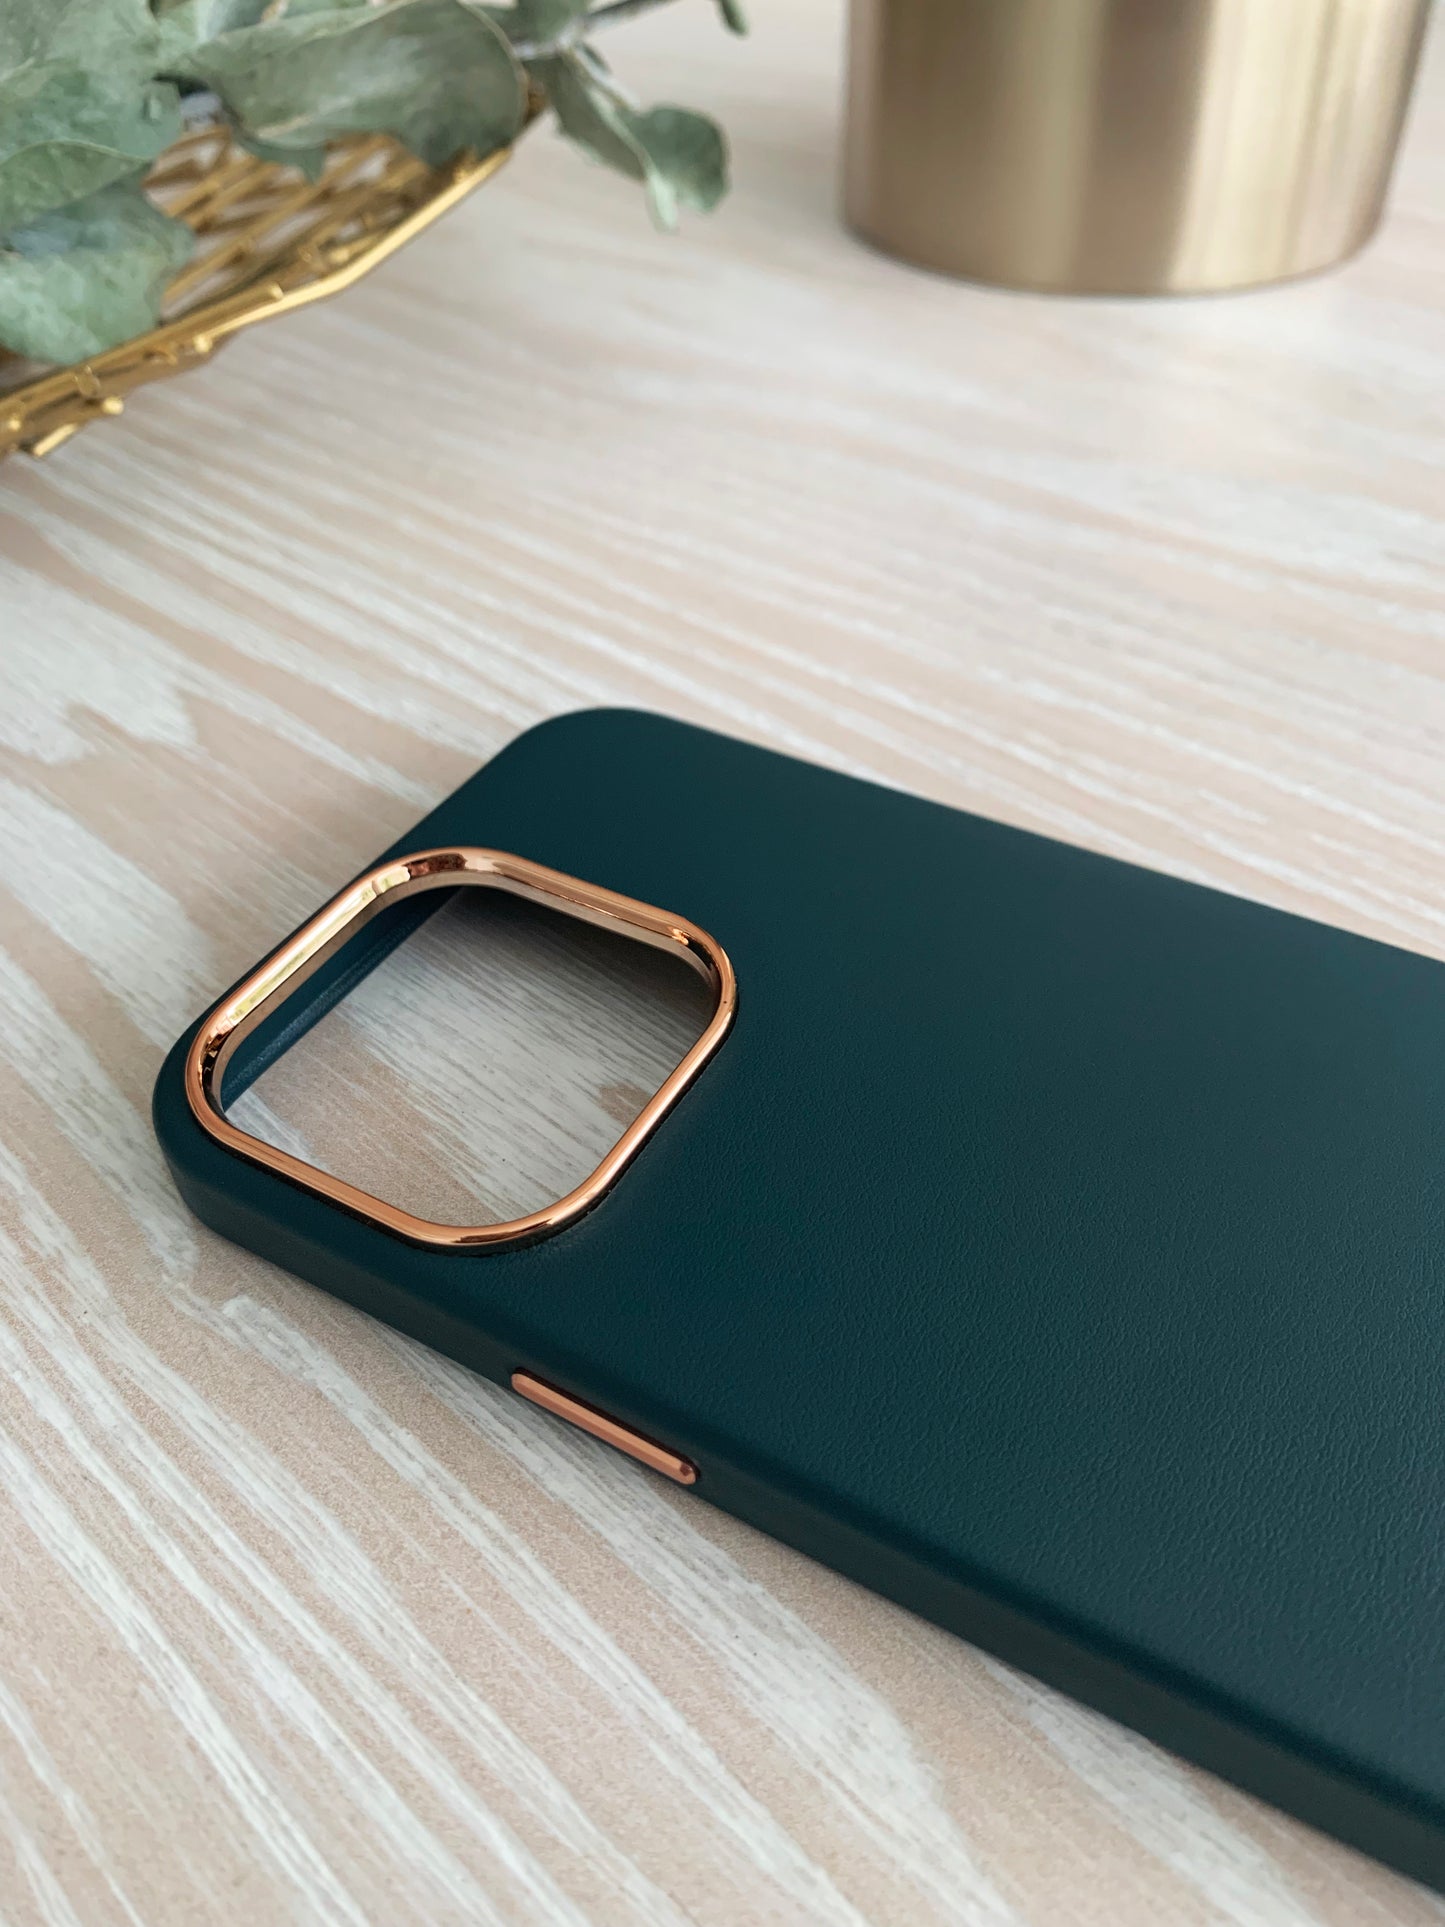 Teal Leather Case with Gold Detail